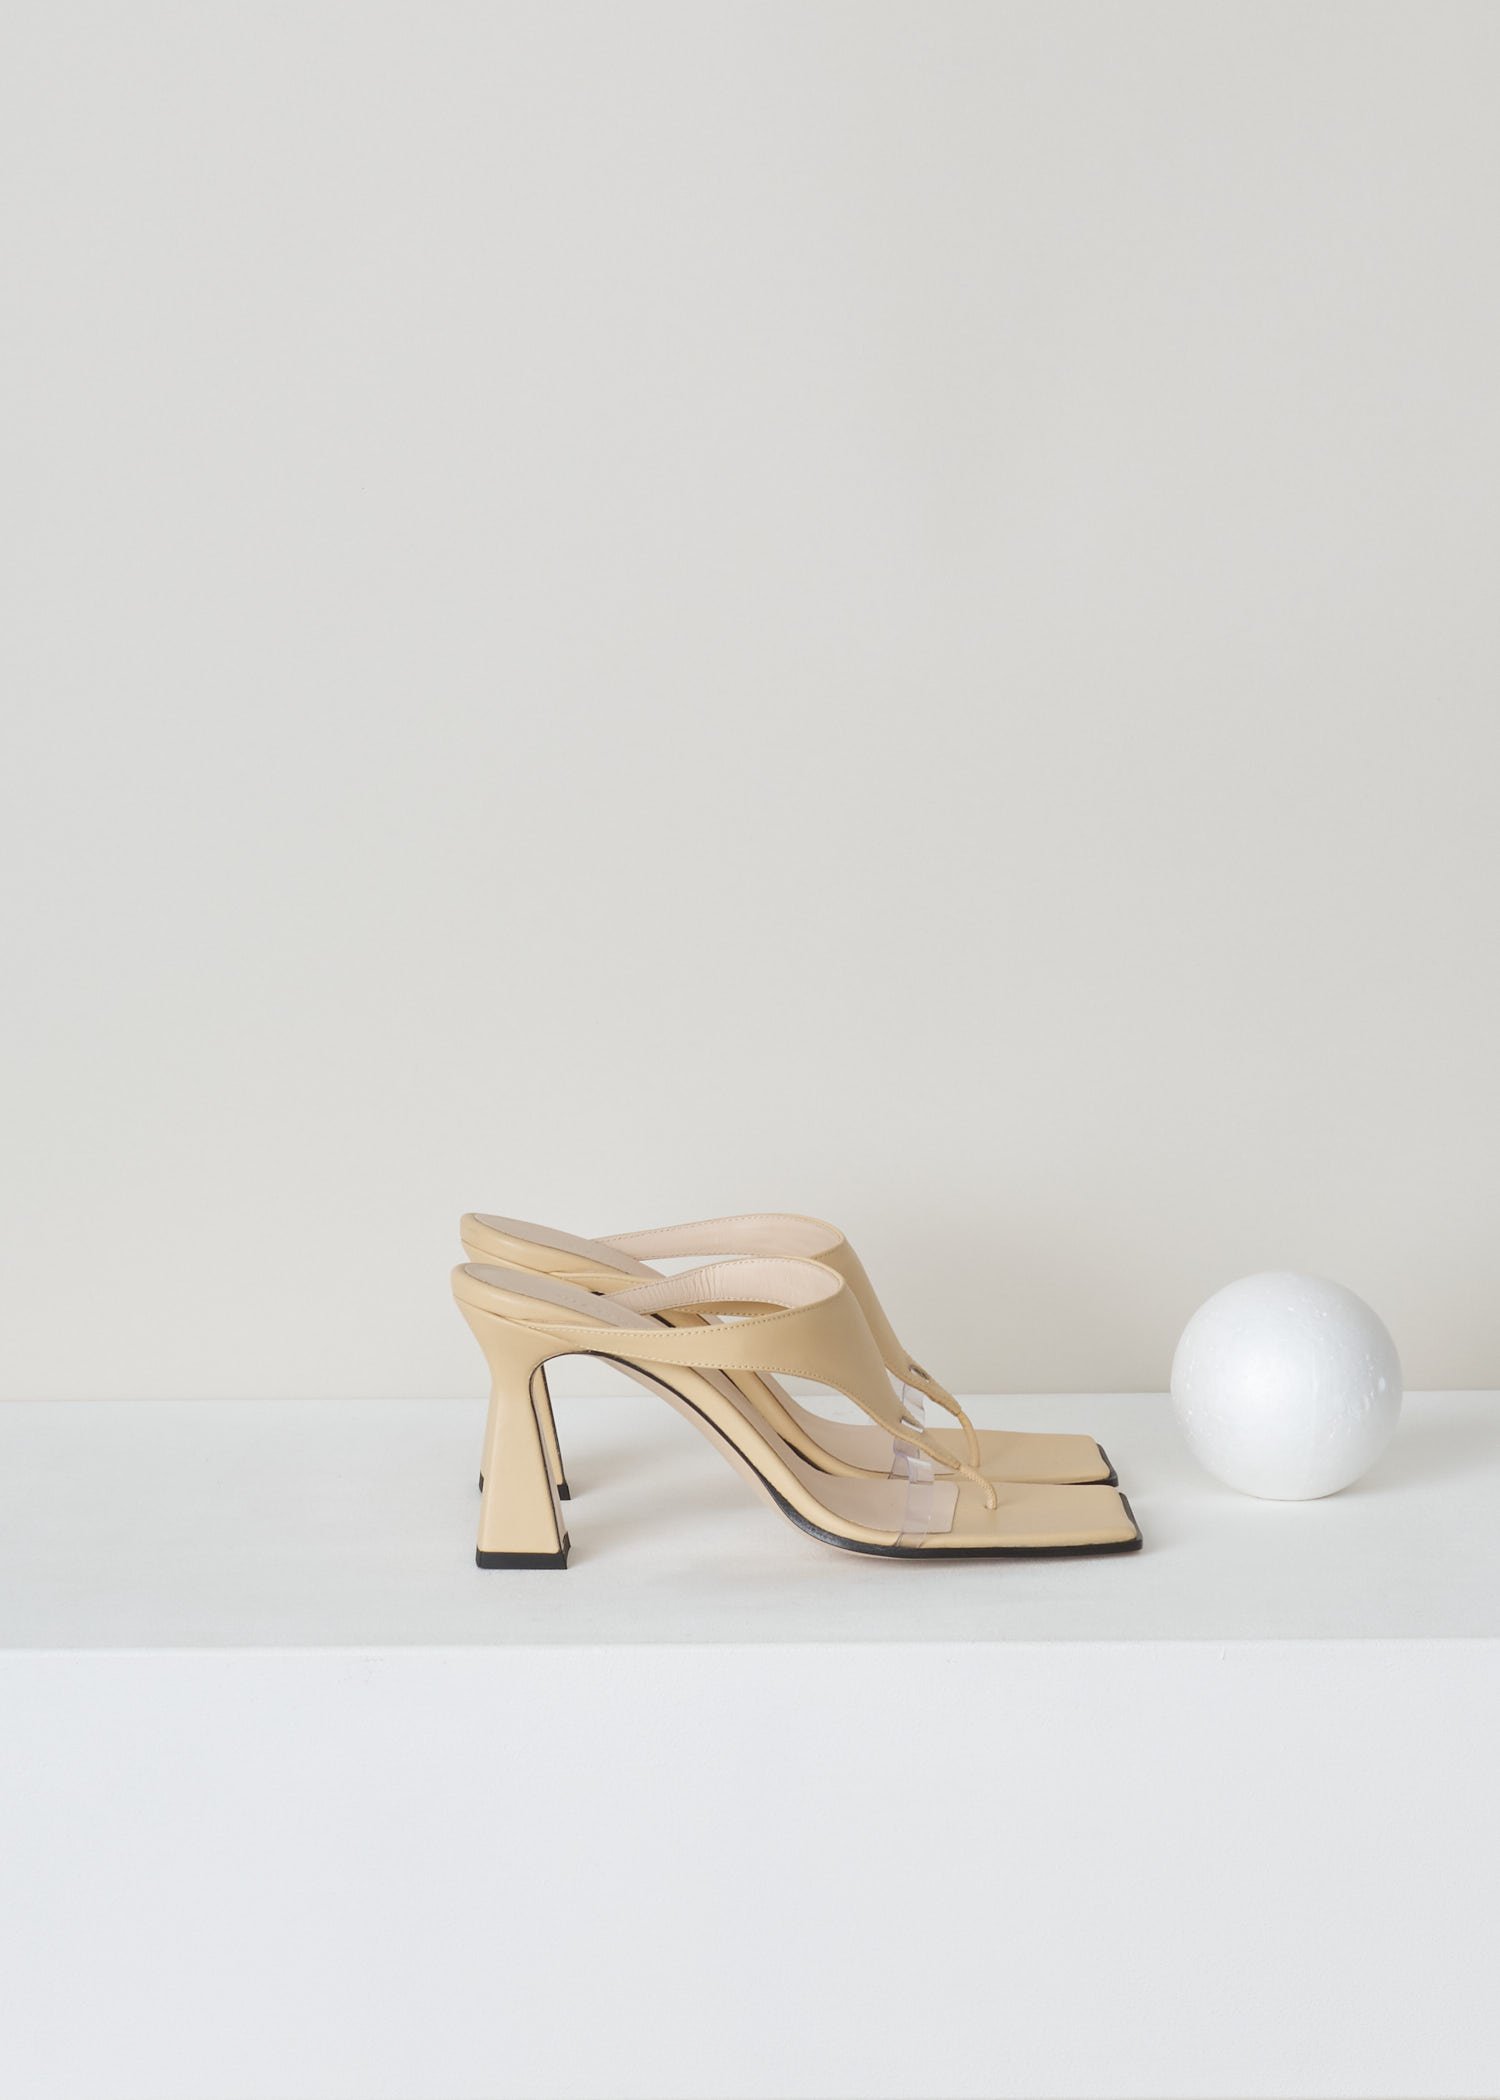 Wandler, Lambskin cashew sandal, Feline_Sandal_Lambskin_Leather_Cashew, beige, side, Lambskin mules, comes in cashew color. Featuring square-cut open toes and lightly padded straps for extra comfort.